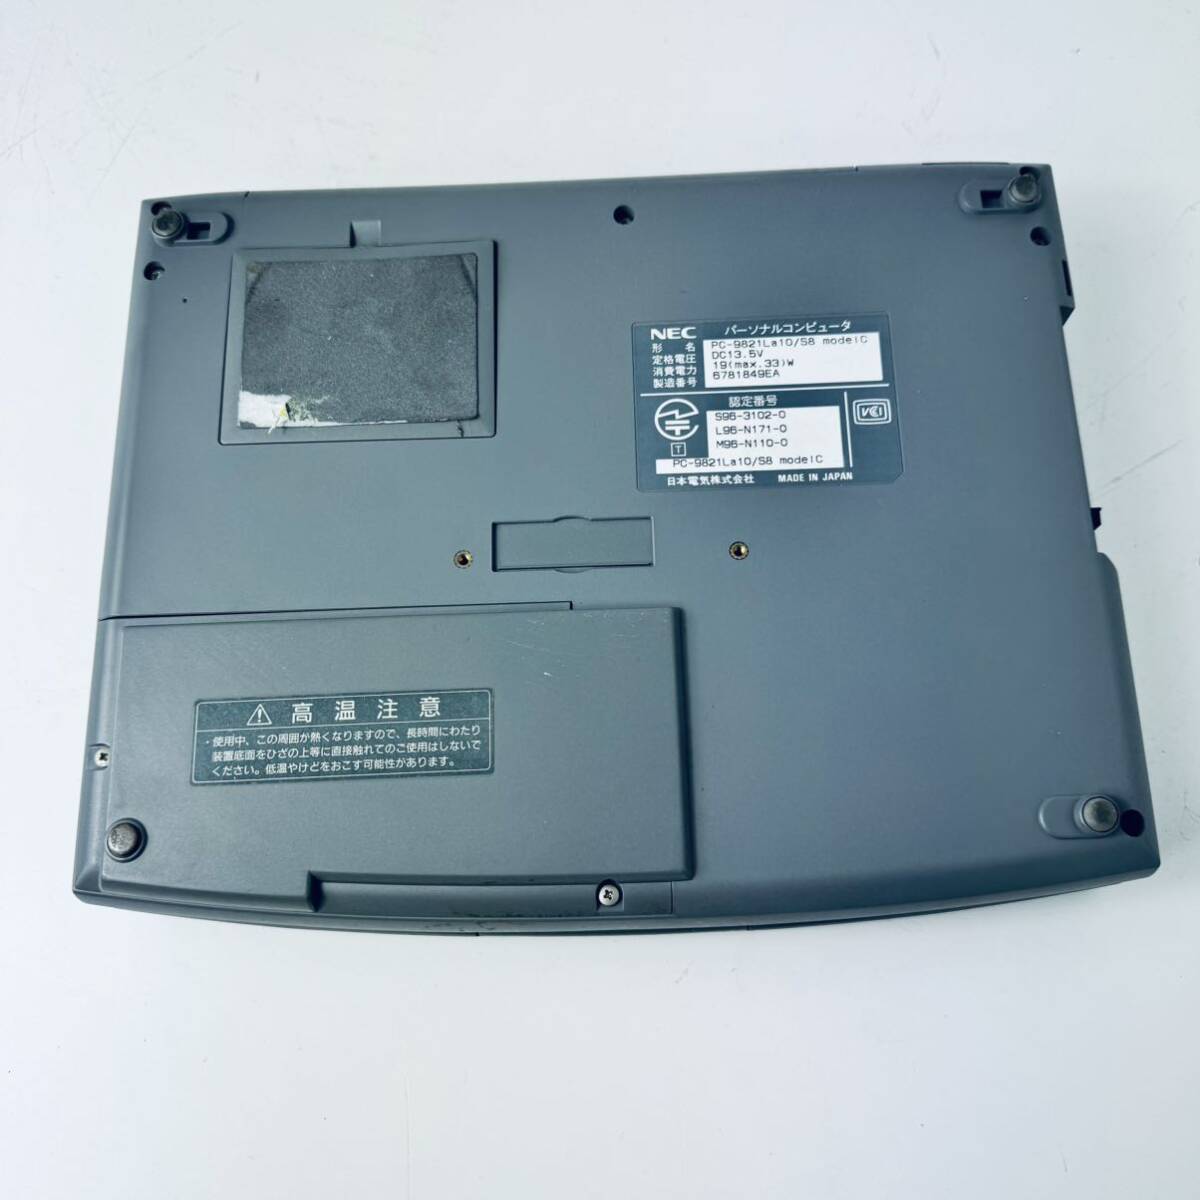 N98-11 NEC PC-9821La10/S8 HDD missing screen with defect operation not yet verification 